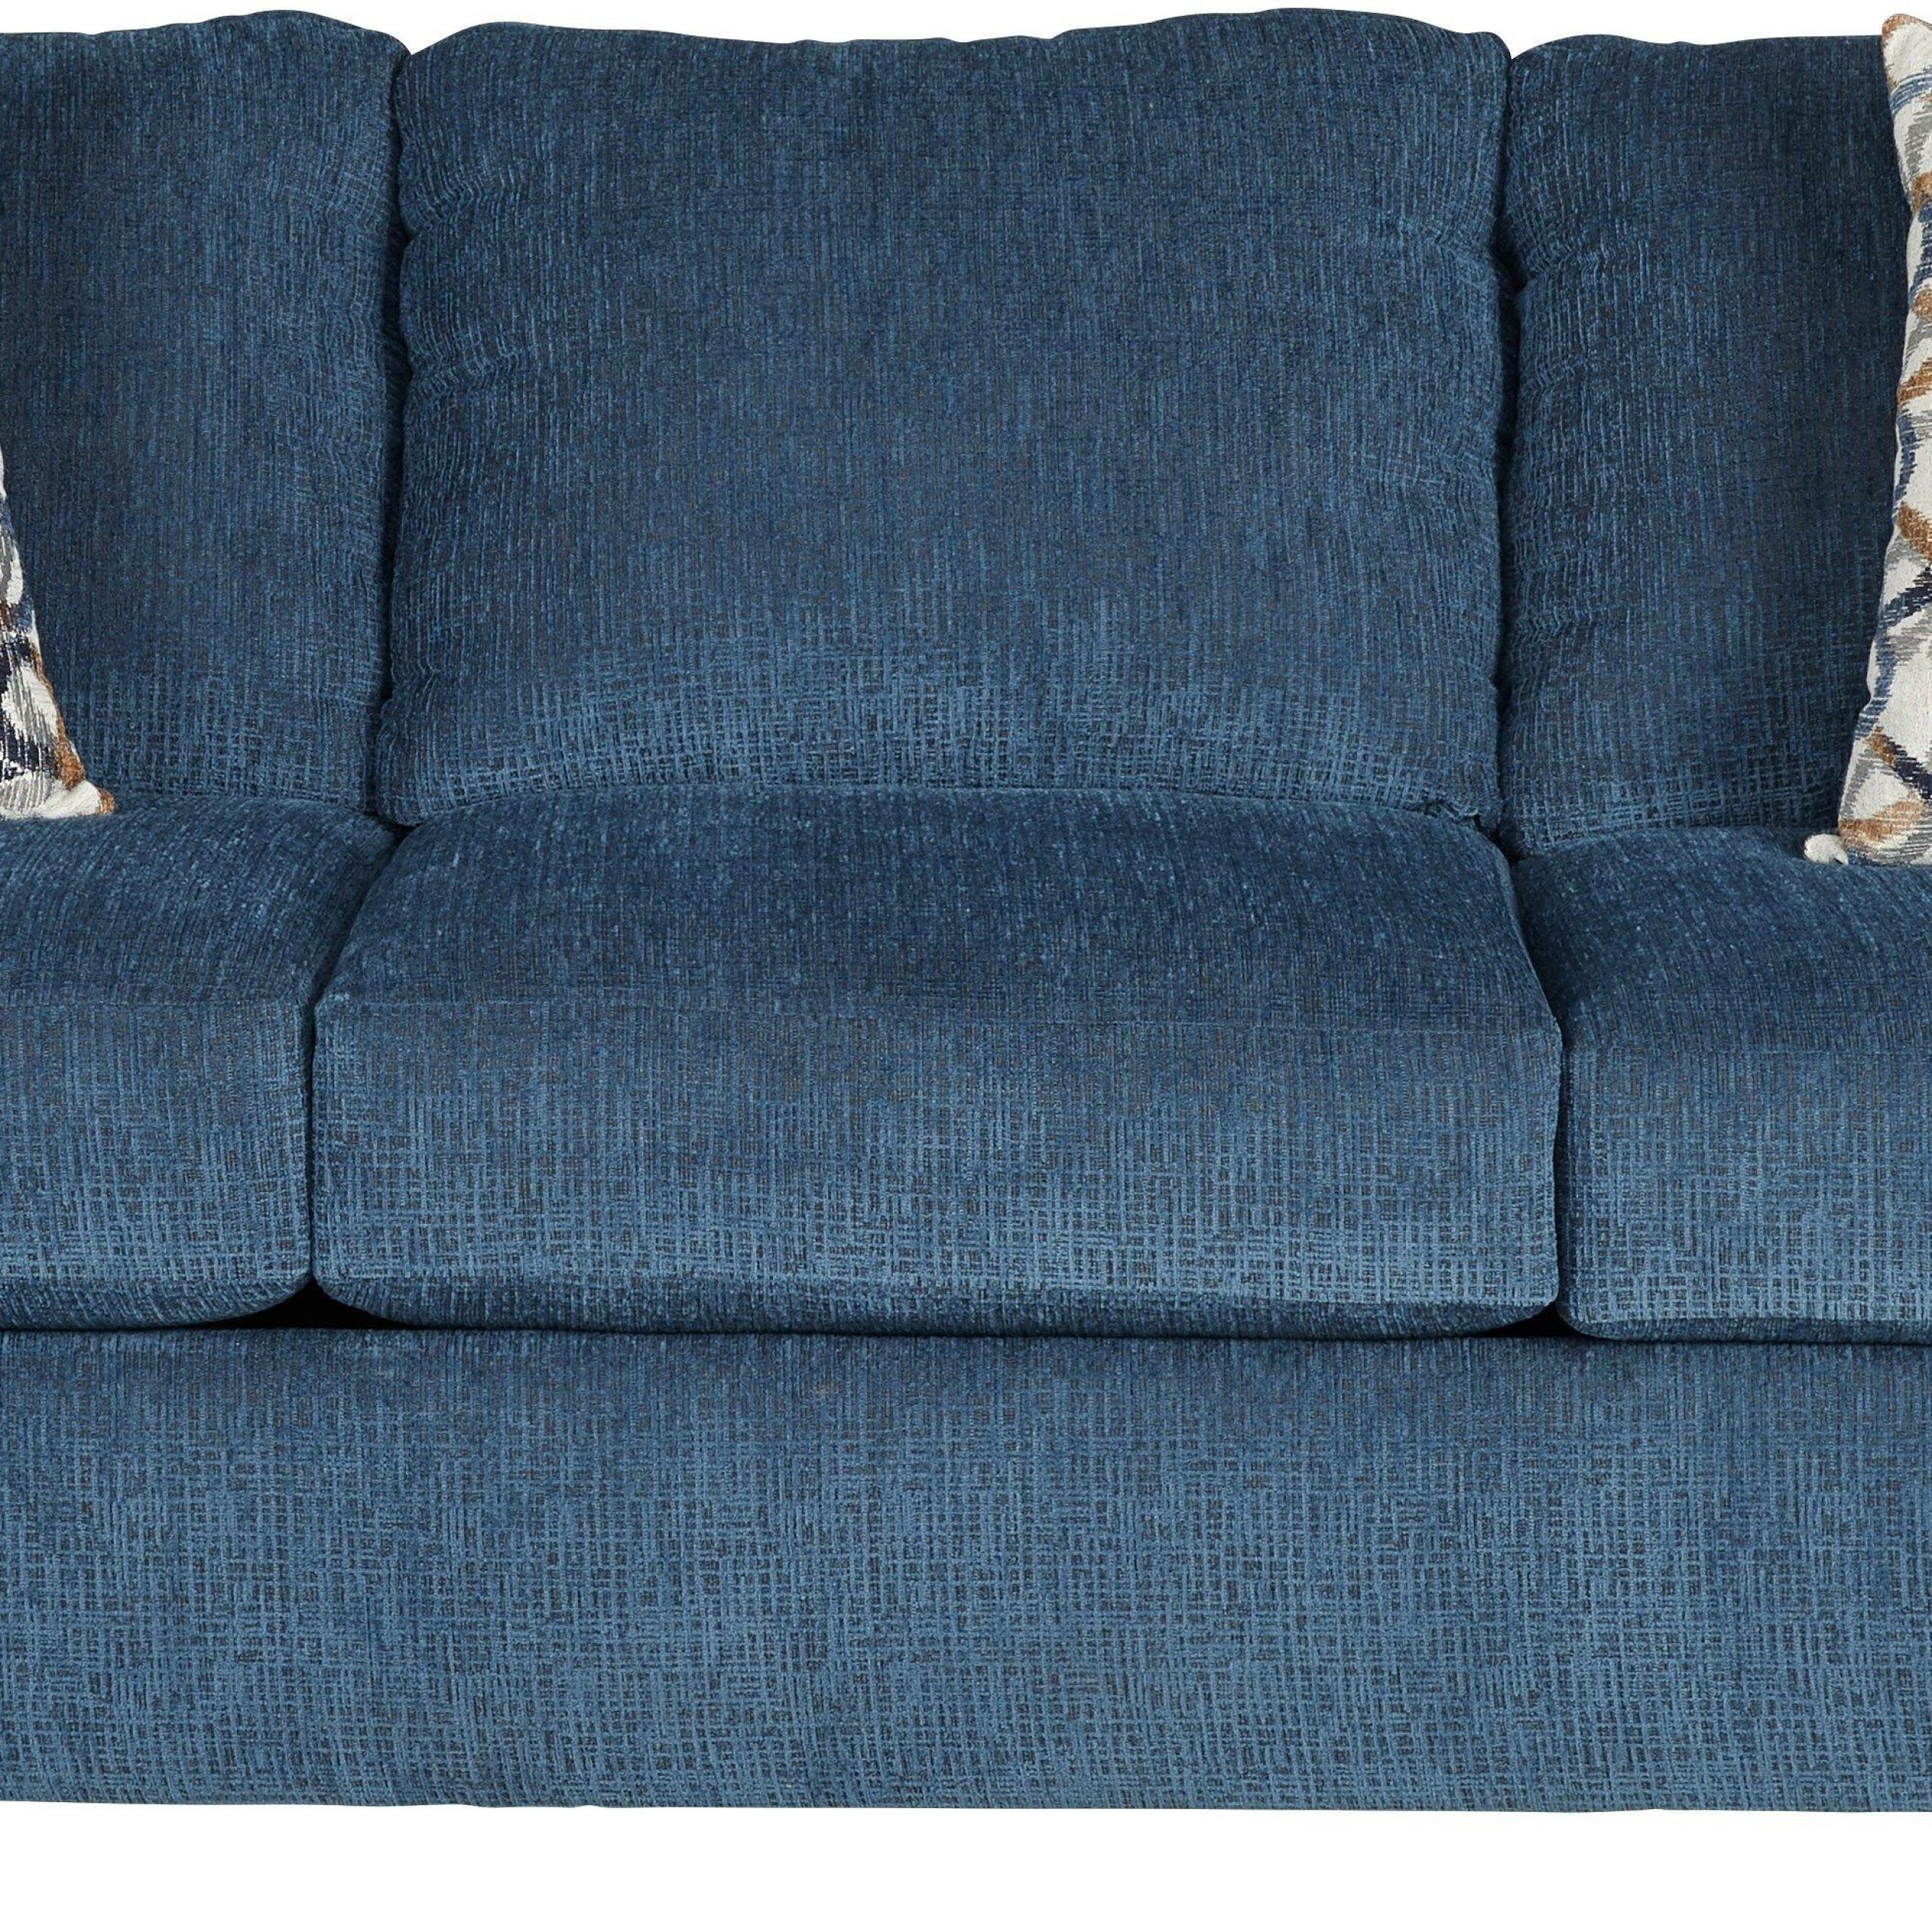 Navy Blue Living Room Set Inspirational Lucan Navy Sleeper In 2019 With Navy Sleeper Sofa Couches (View 15 of 20)